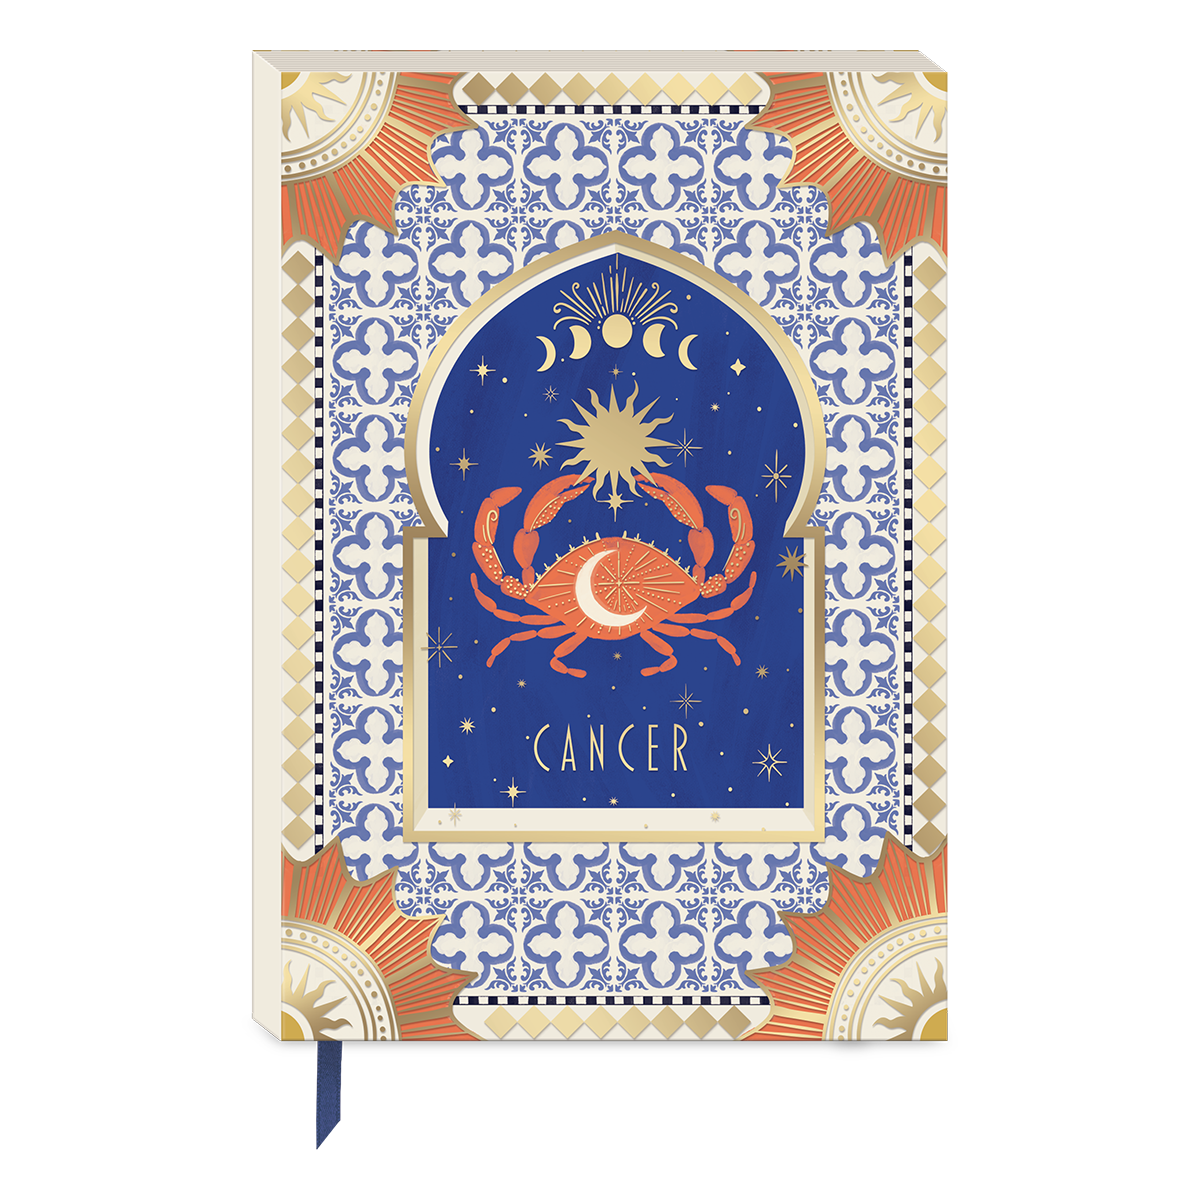 Zodiac Cancer Softcover Journal Product